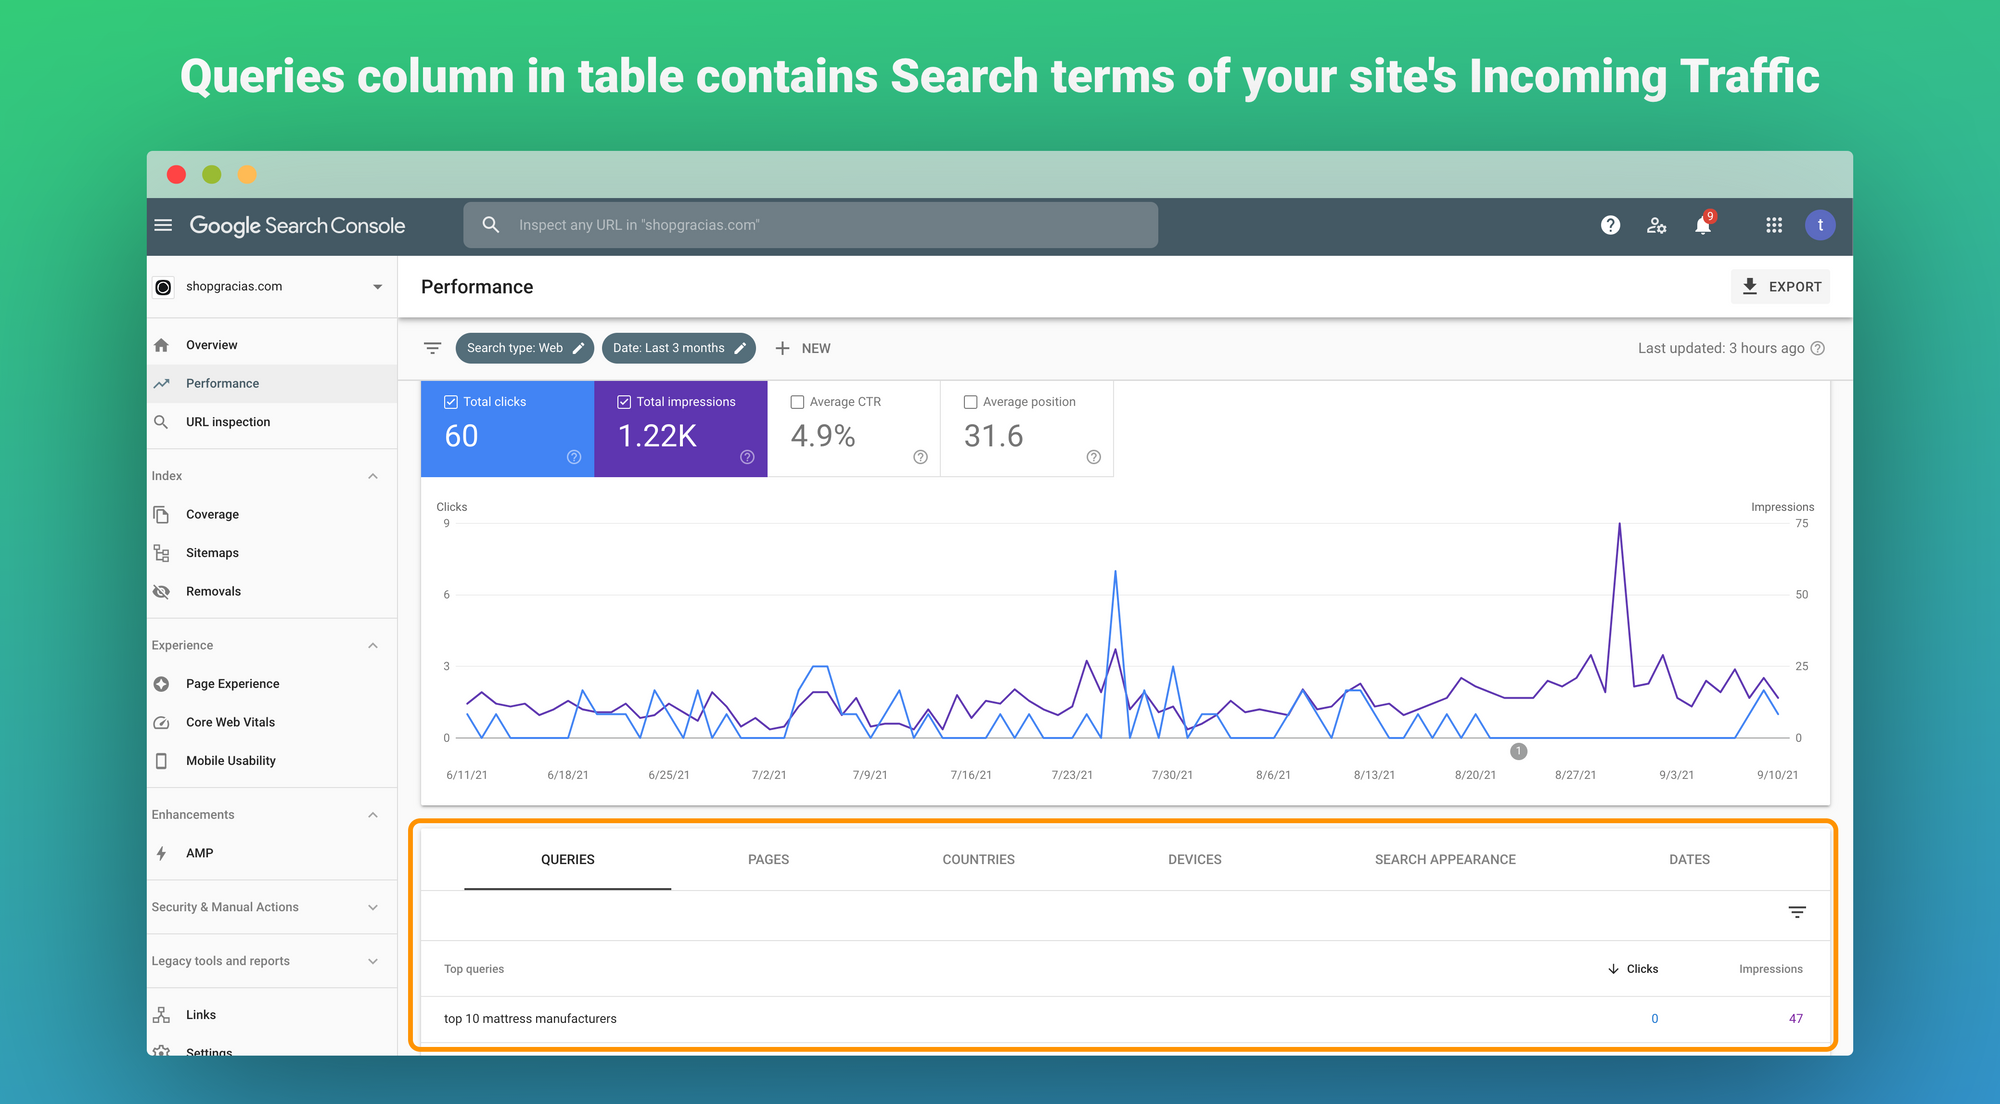 Queries column in table contains Search terms of your site's Incoming Traffic